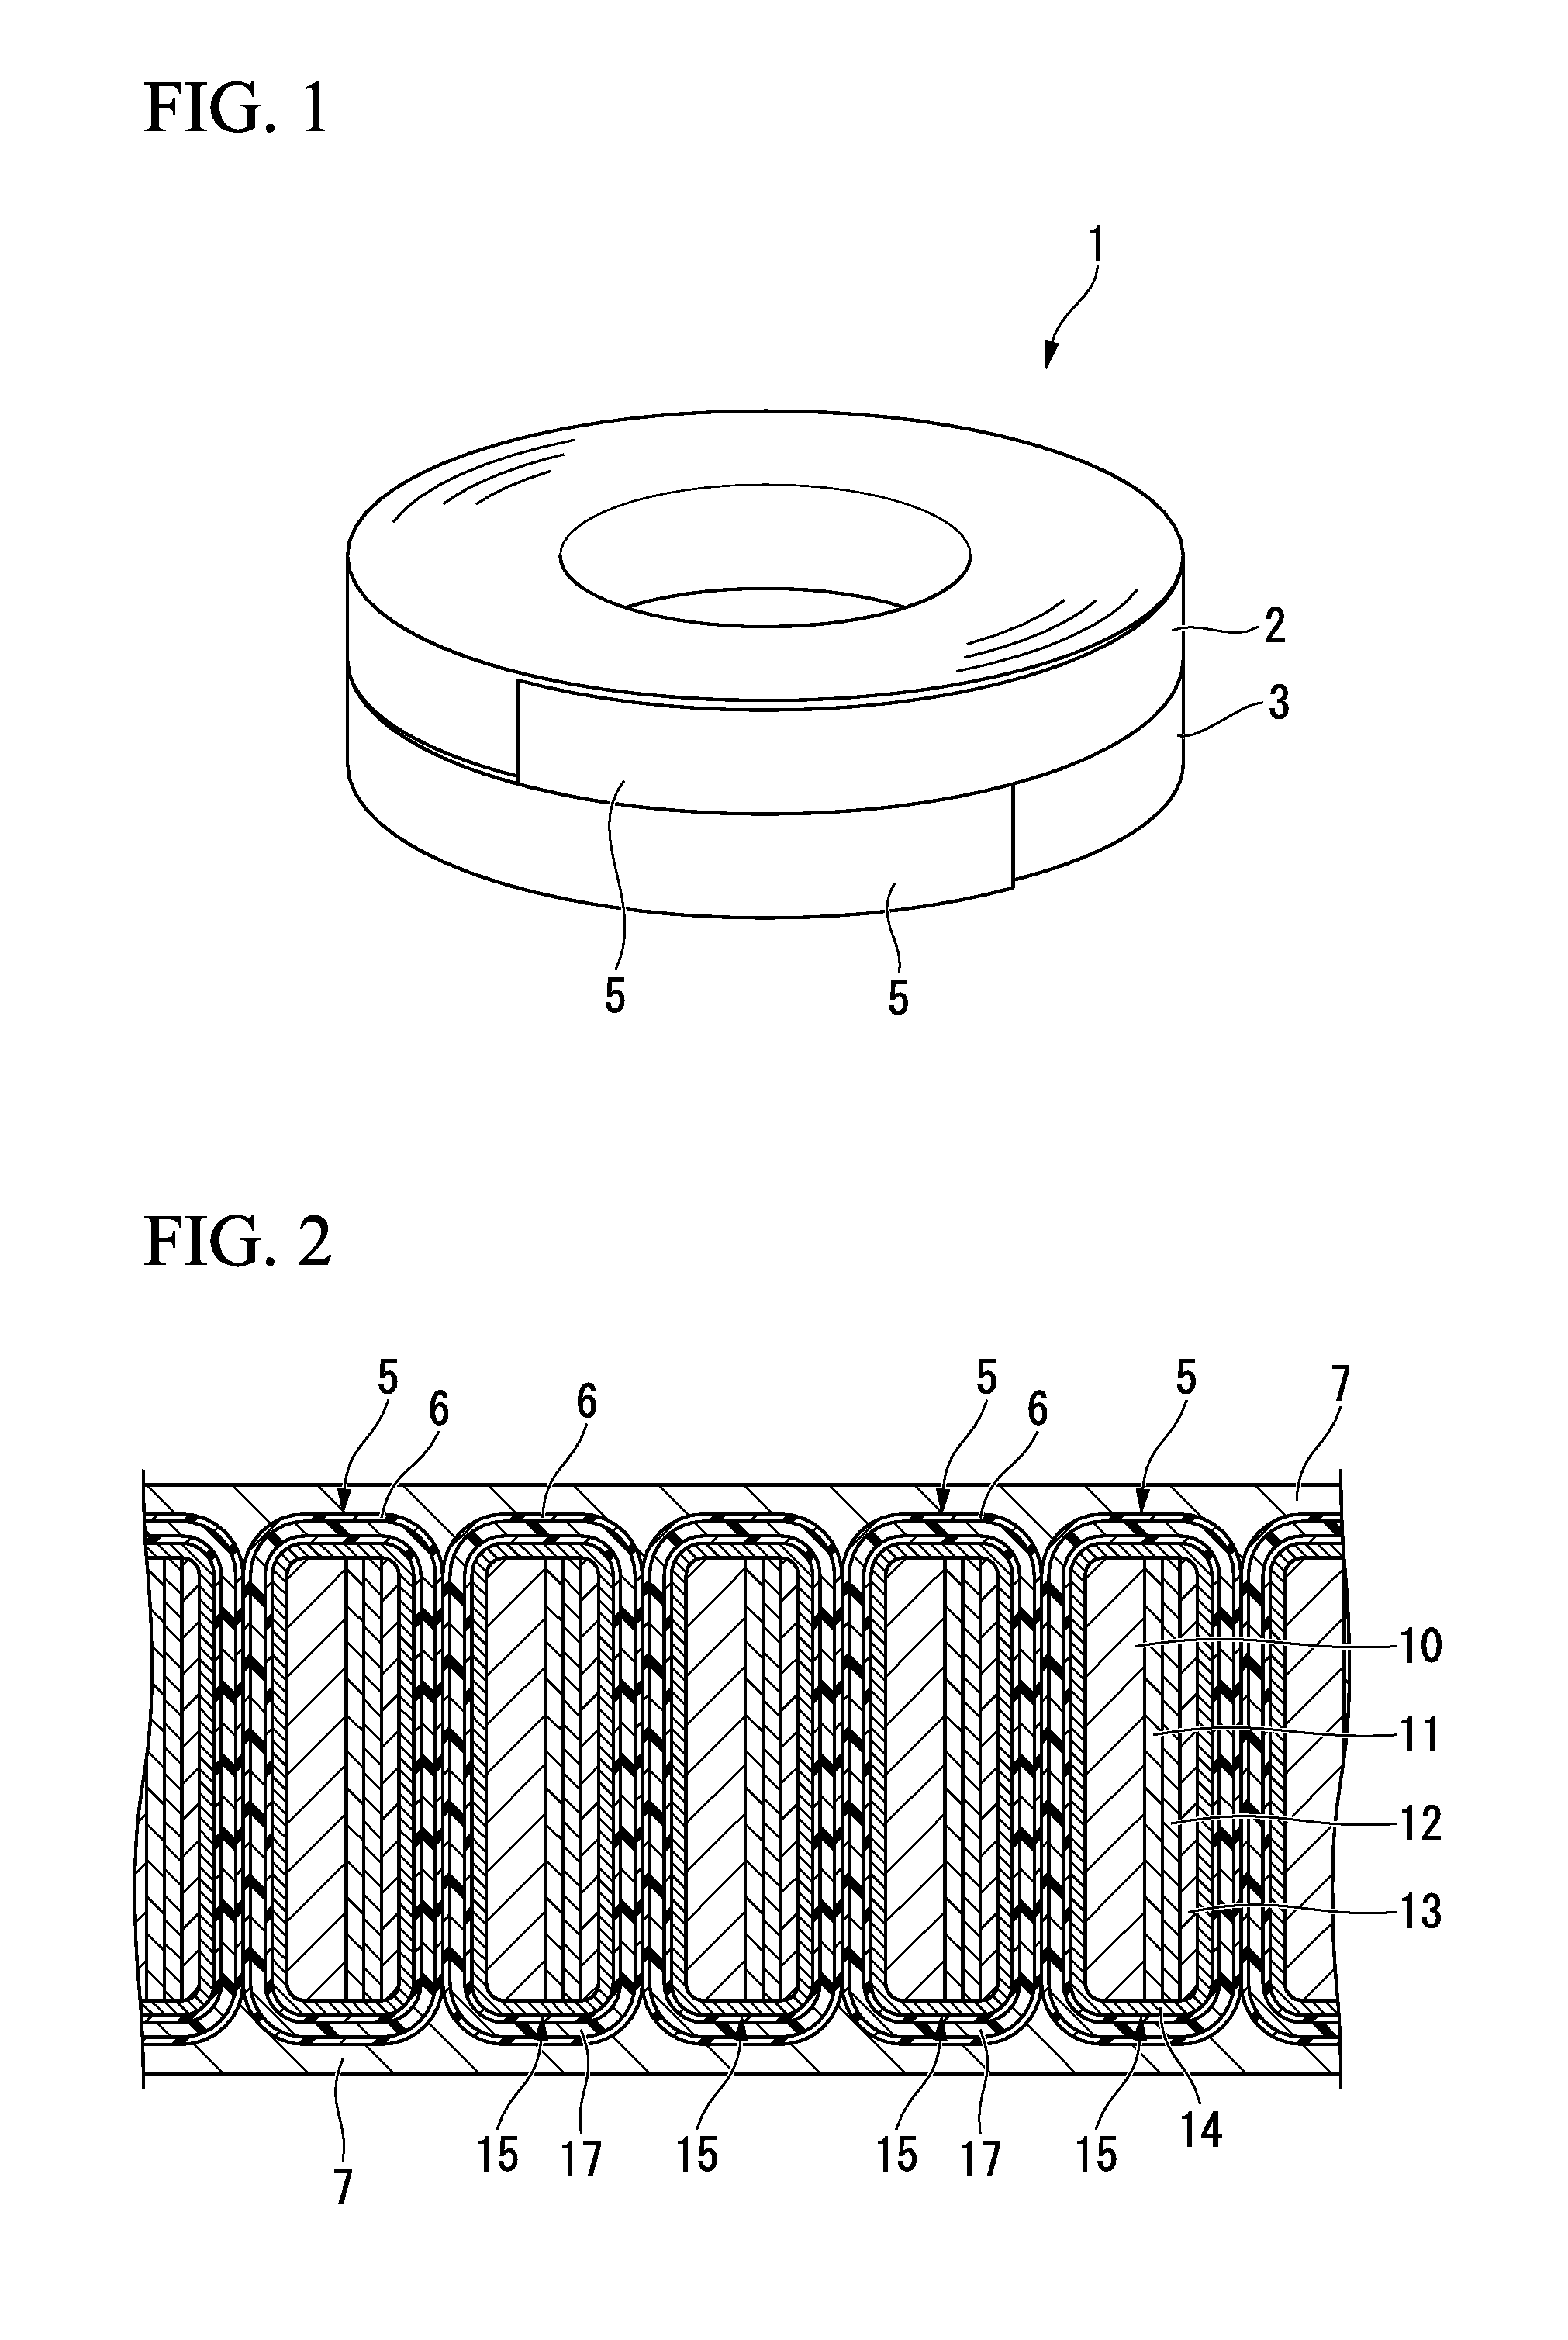 Oxide superconductor wire and superconducting coil